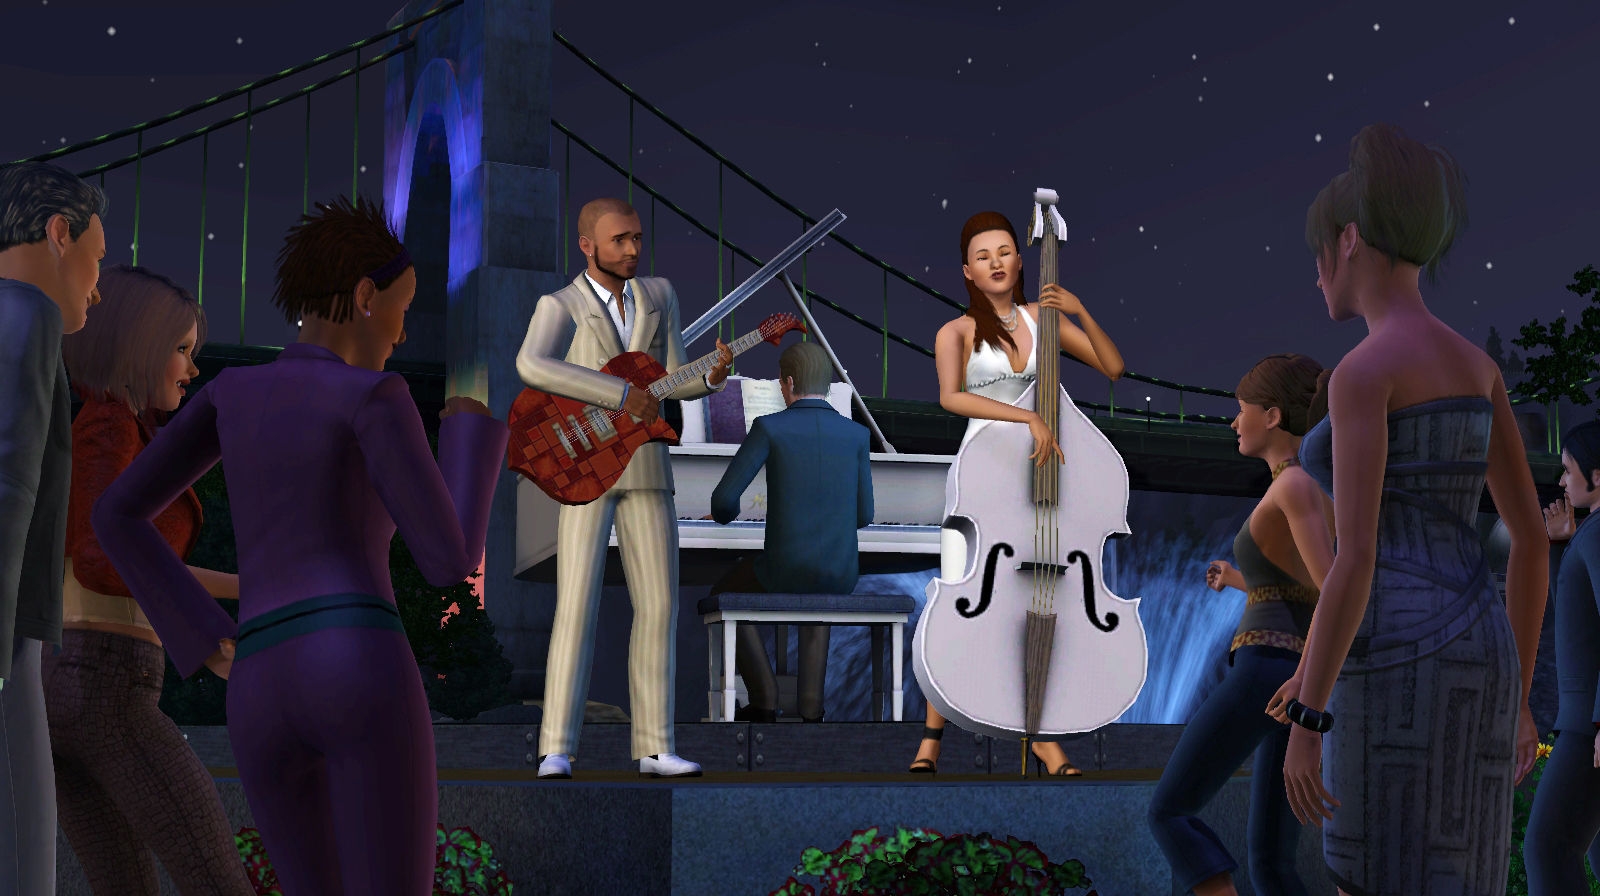 Download the sims 4 full dlc